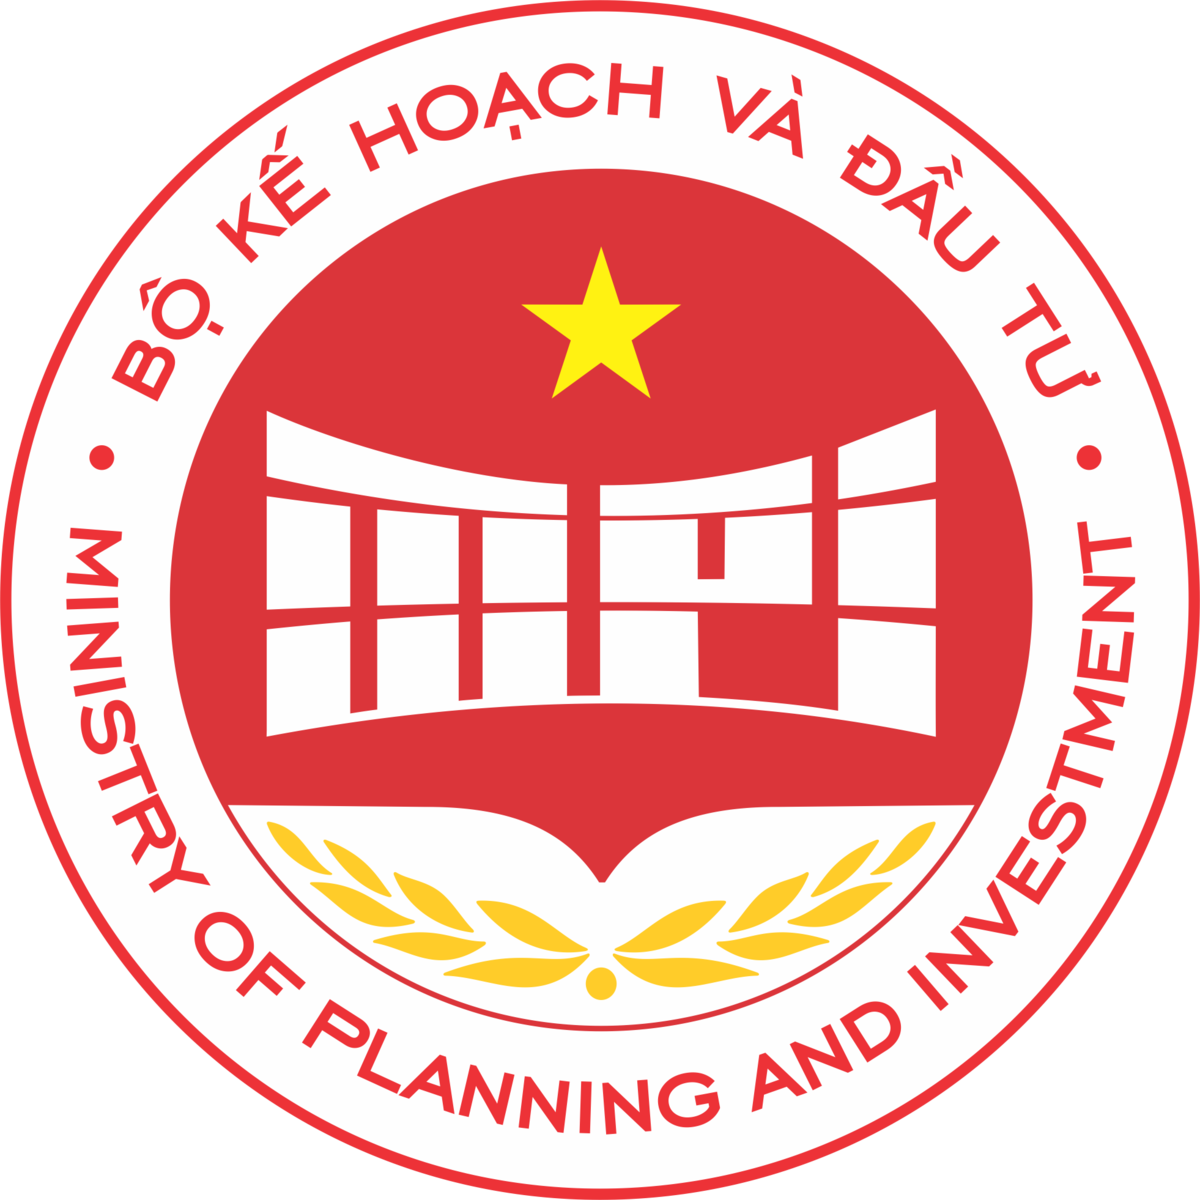 Emblem of the Ministry of Planning and Investment (MPI)